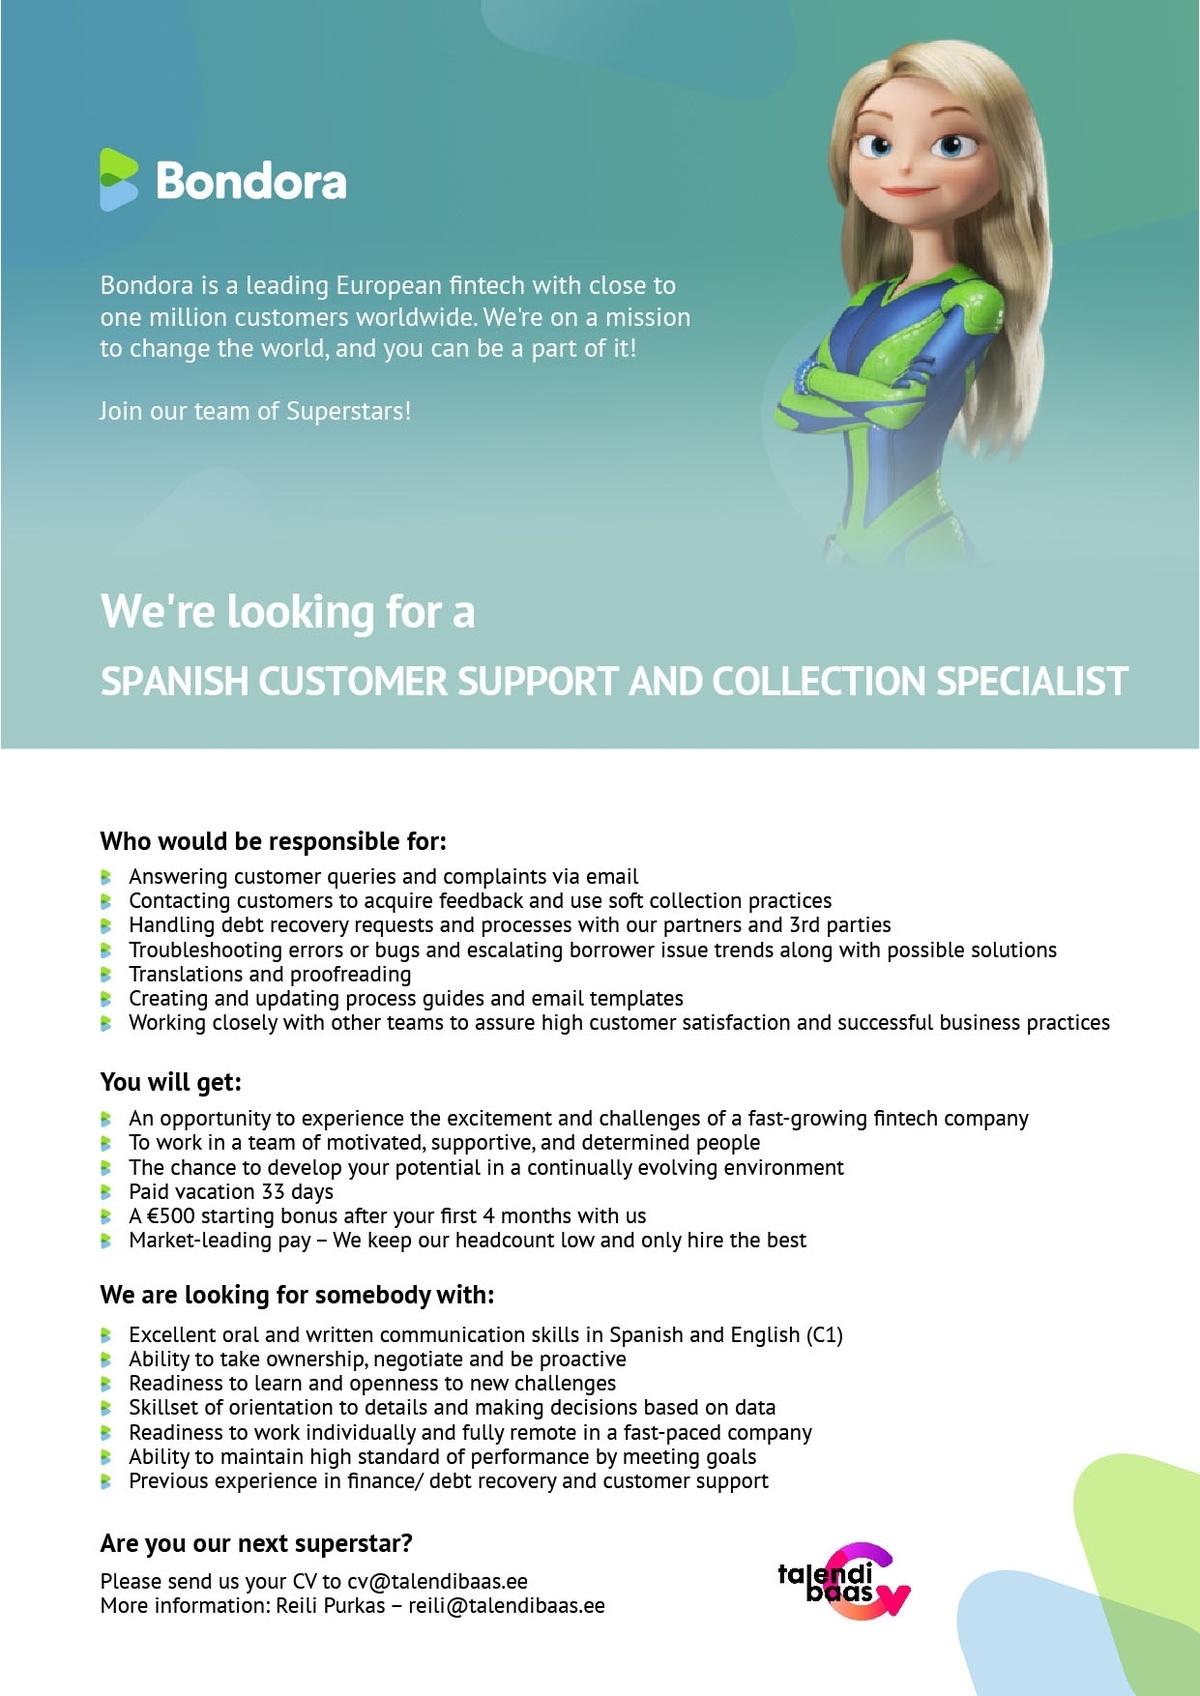 Talendibaas OÜ SPANISH CUSTOMER SUPPORT AND COLLECTION SPECIALIST